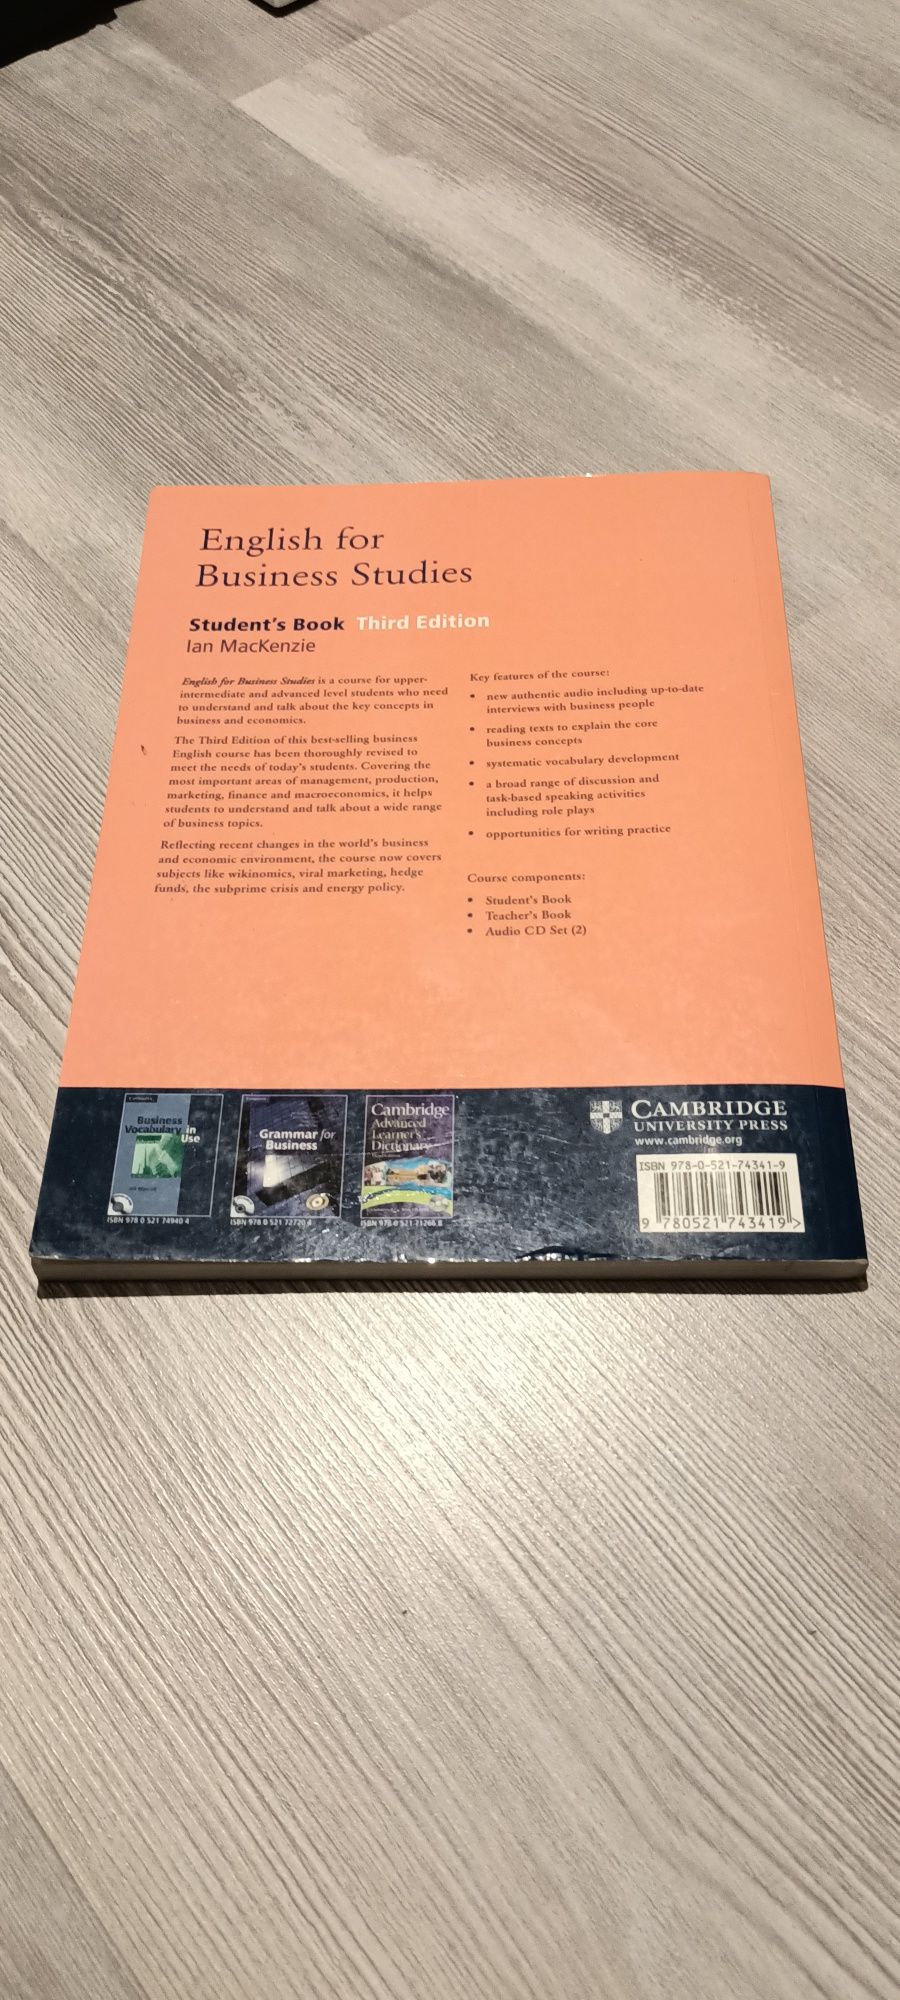 English for business studies - Third Edition